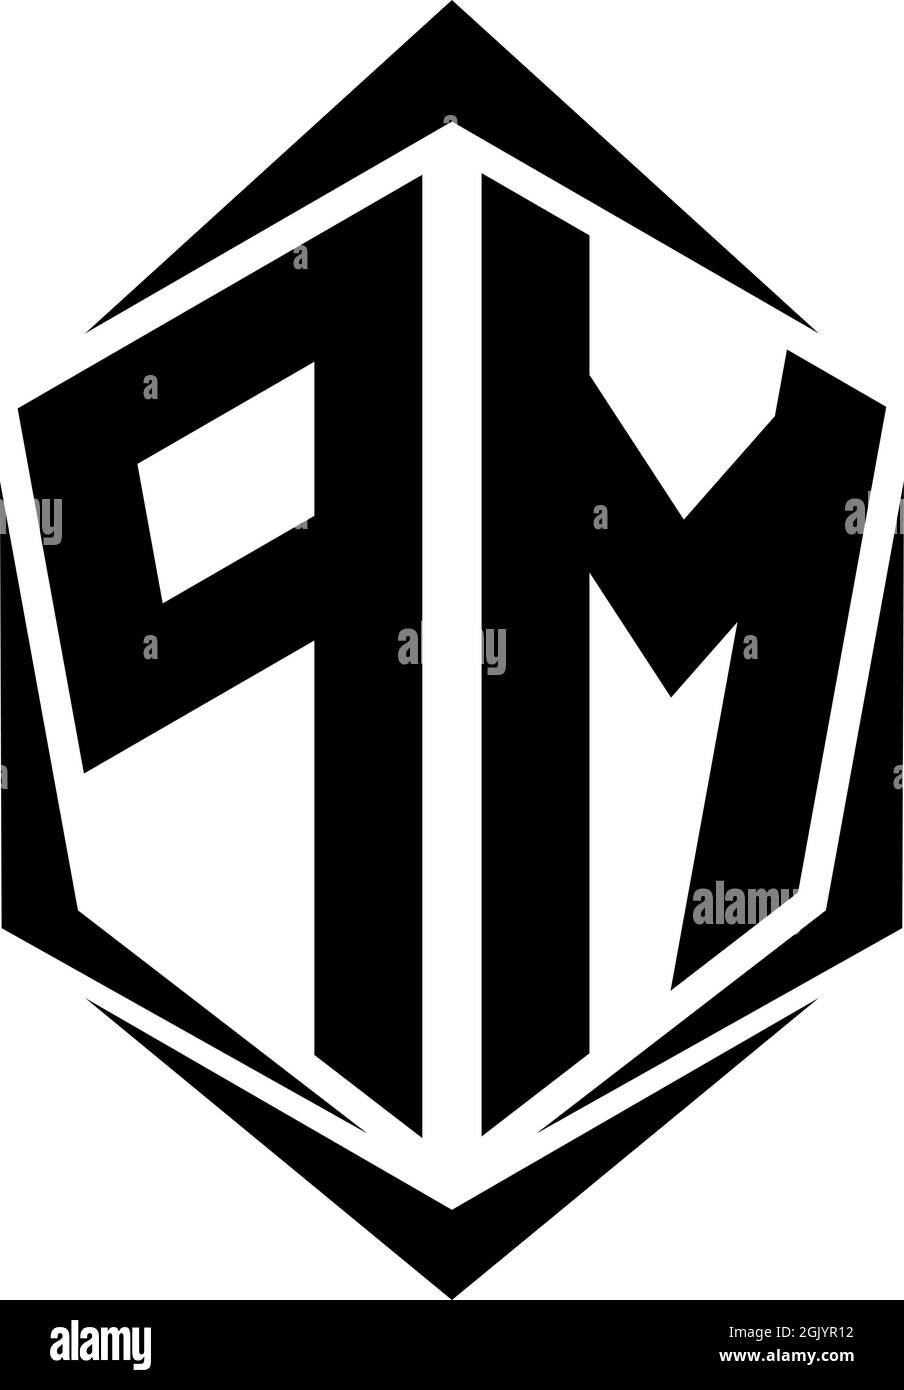 Pm vector vectors Black and White Stock Photos & Images - Page 2